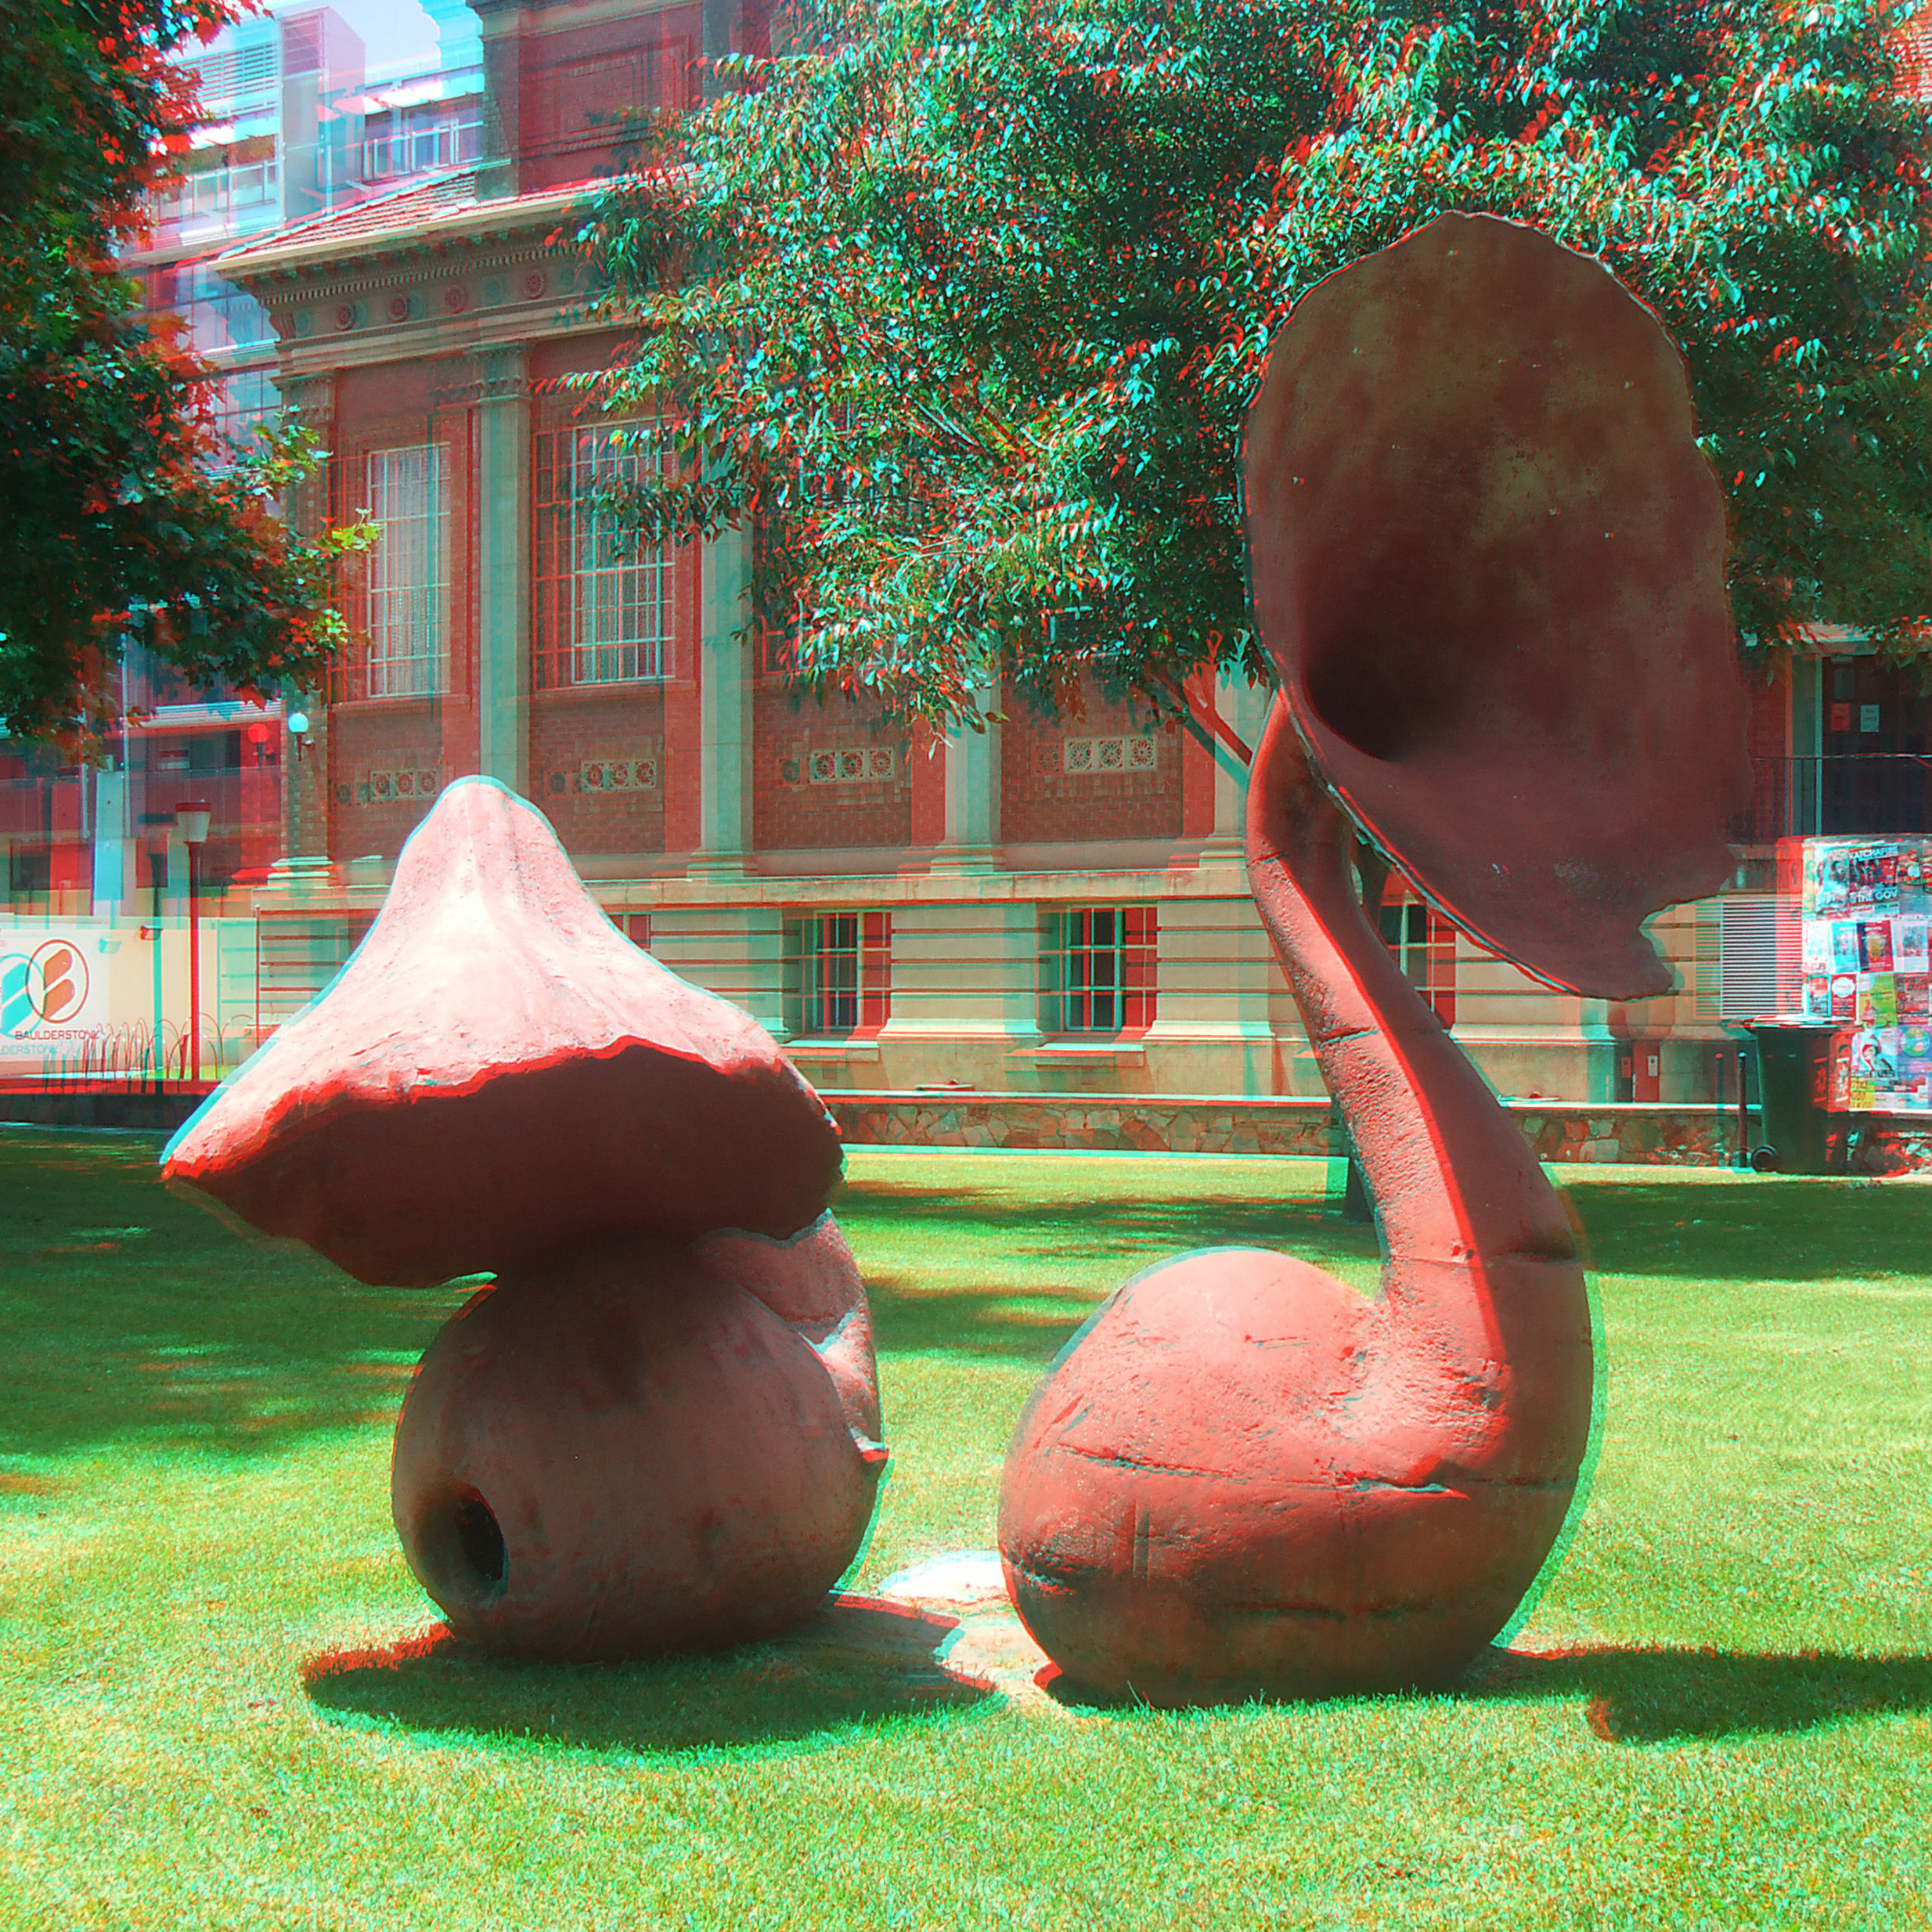 The Fones anaglyph